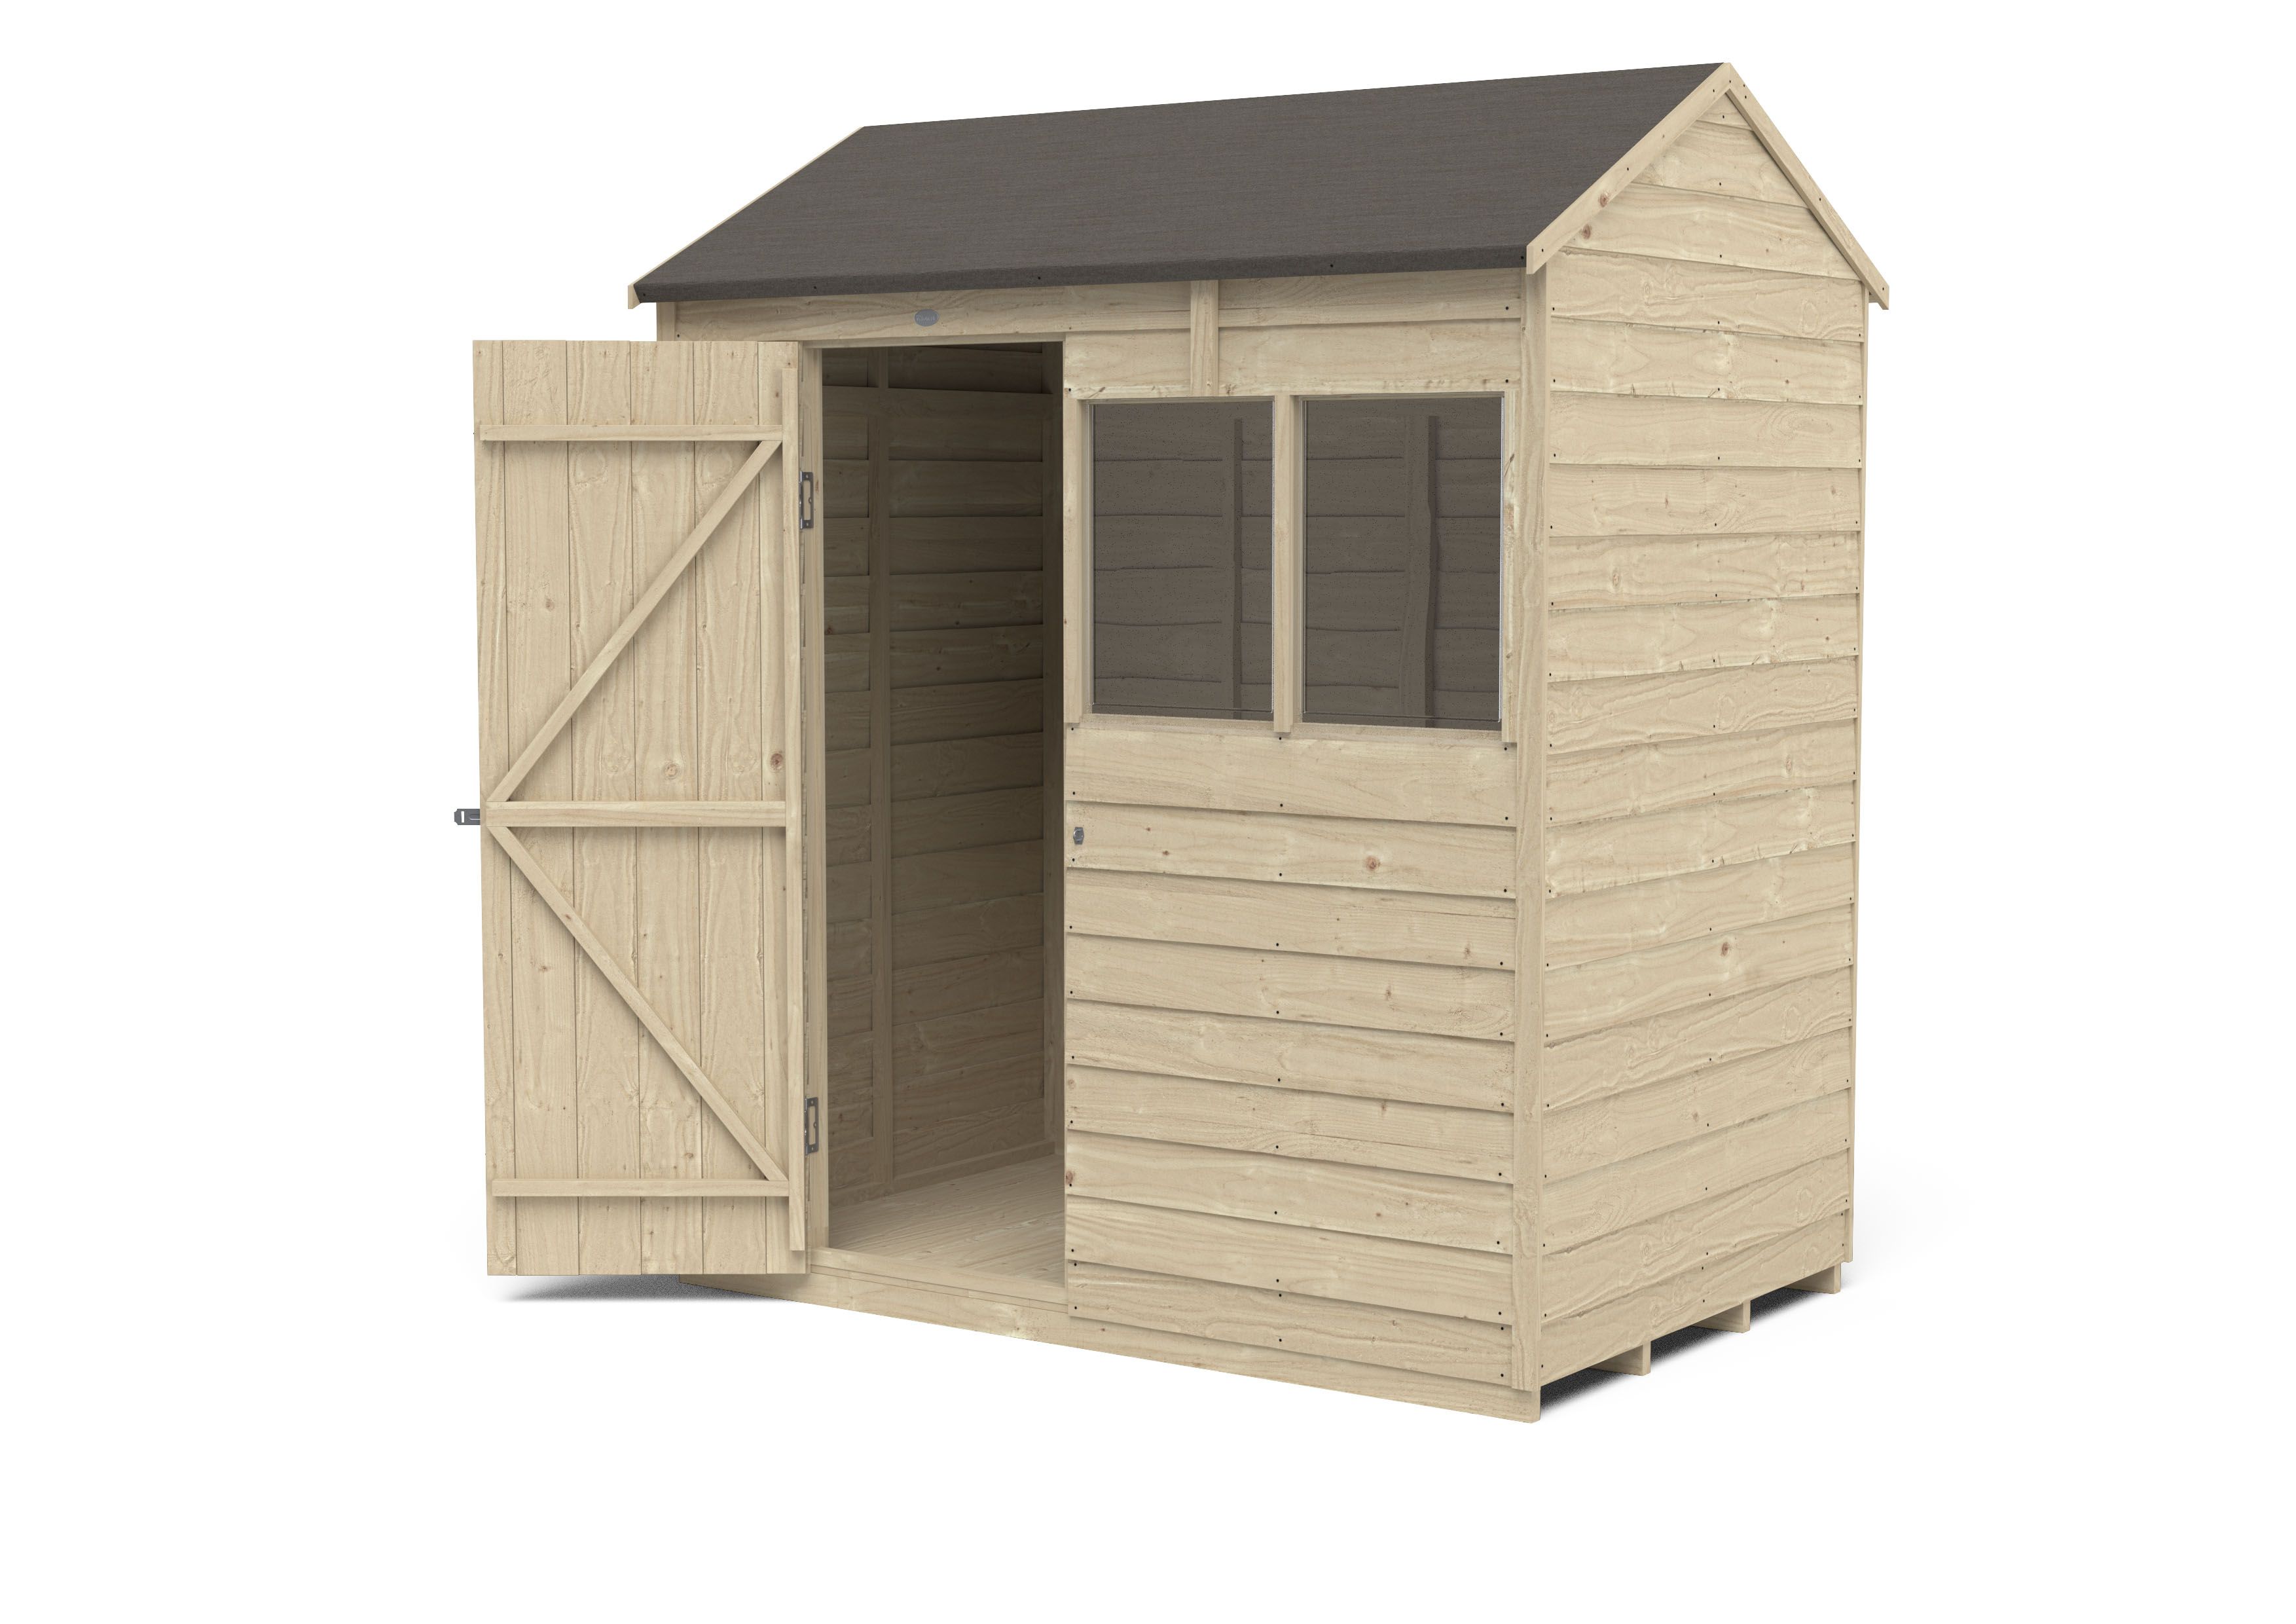 Forest Garden Overlap 6x4 ft Reverse apex Wooden Pressure treated Shed with floor & 2 windows (Base included)